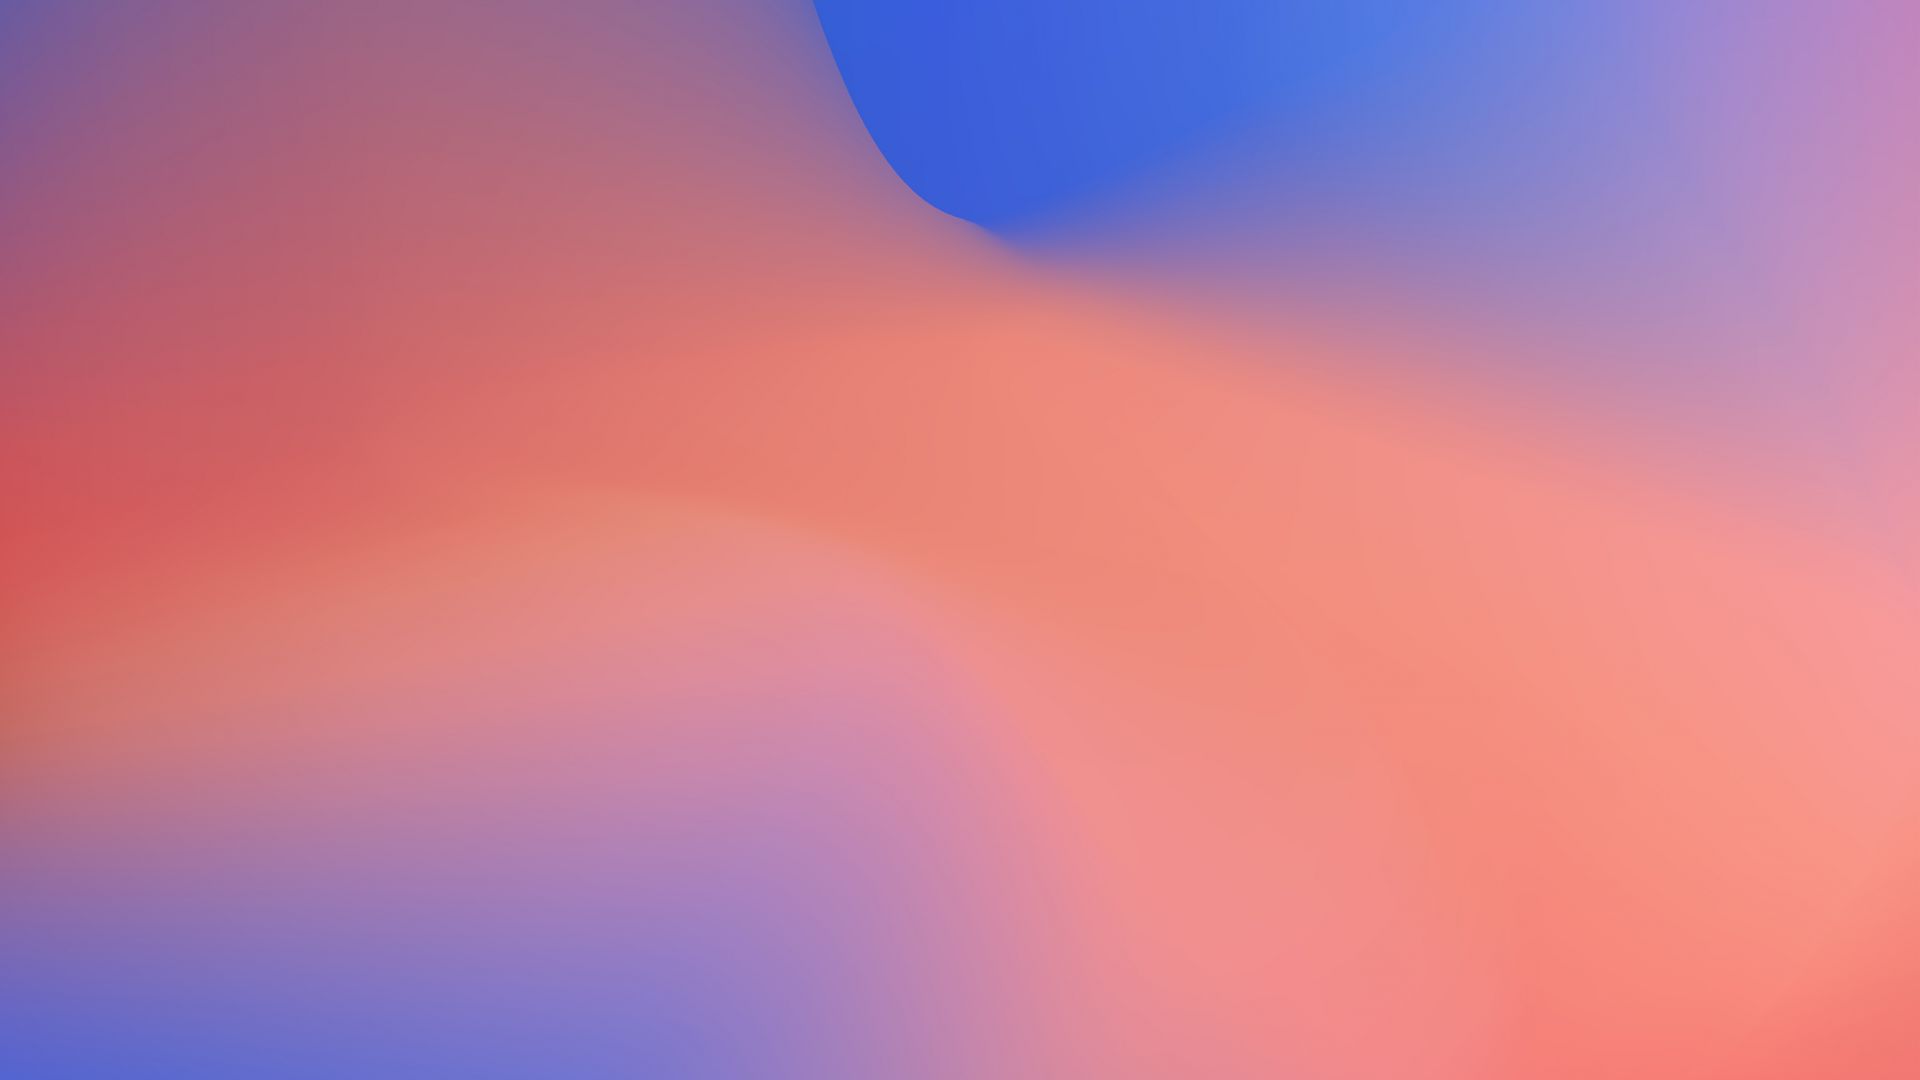 Wallpaper Google Pixel 3, Android 9 Pie, abstract, 4K, OS #20688